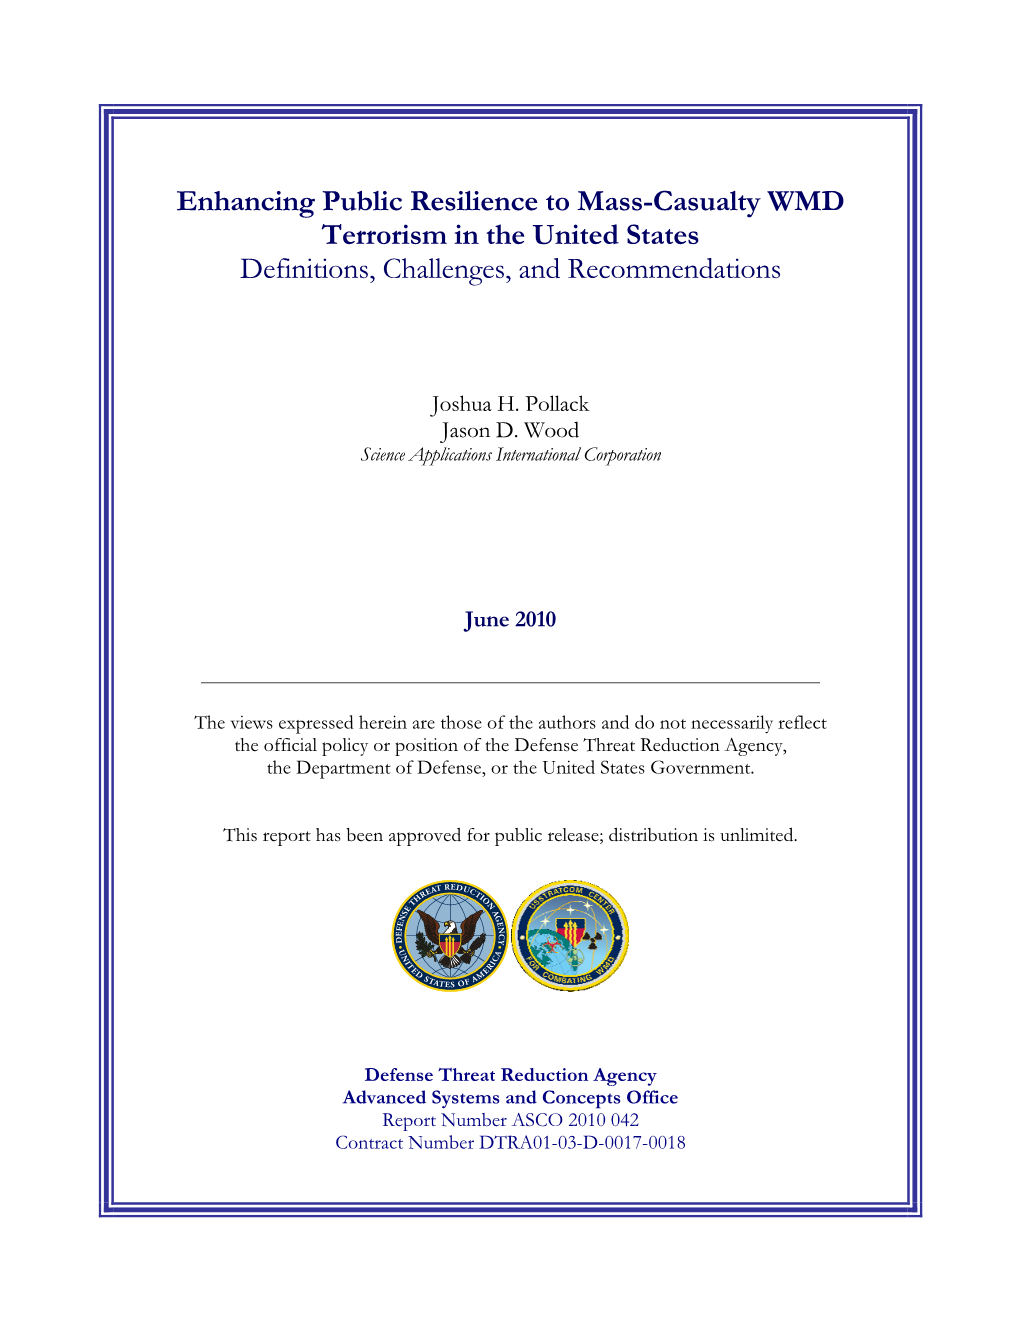 Enhancing Public Resilience to Mass-Casualty WMD Terrorism in the United States Definitions, Challenges, and Recommendations